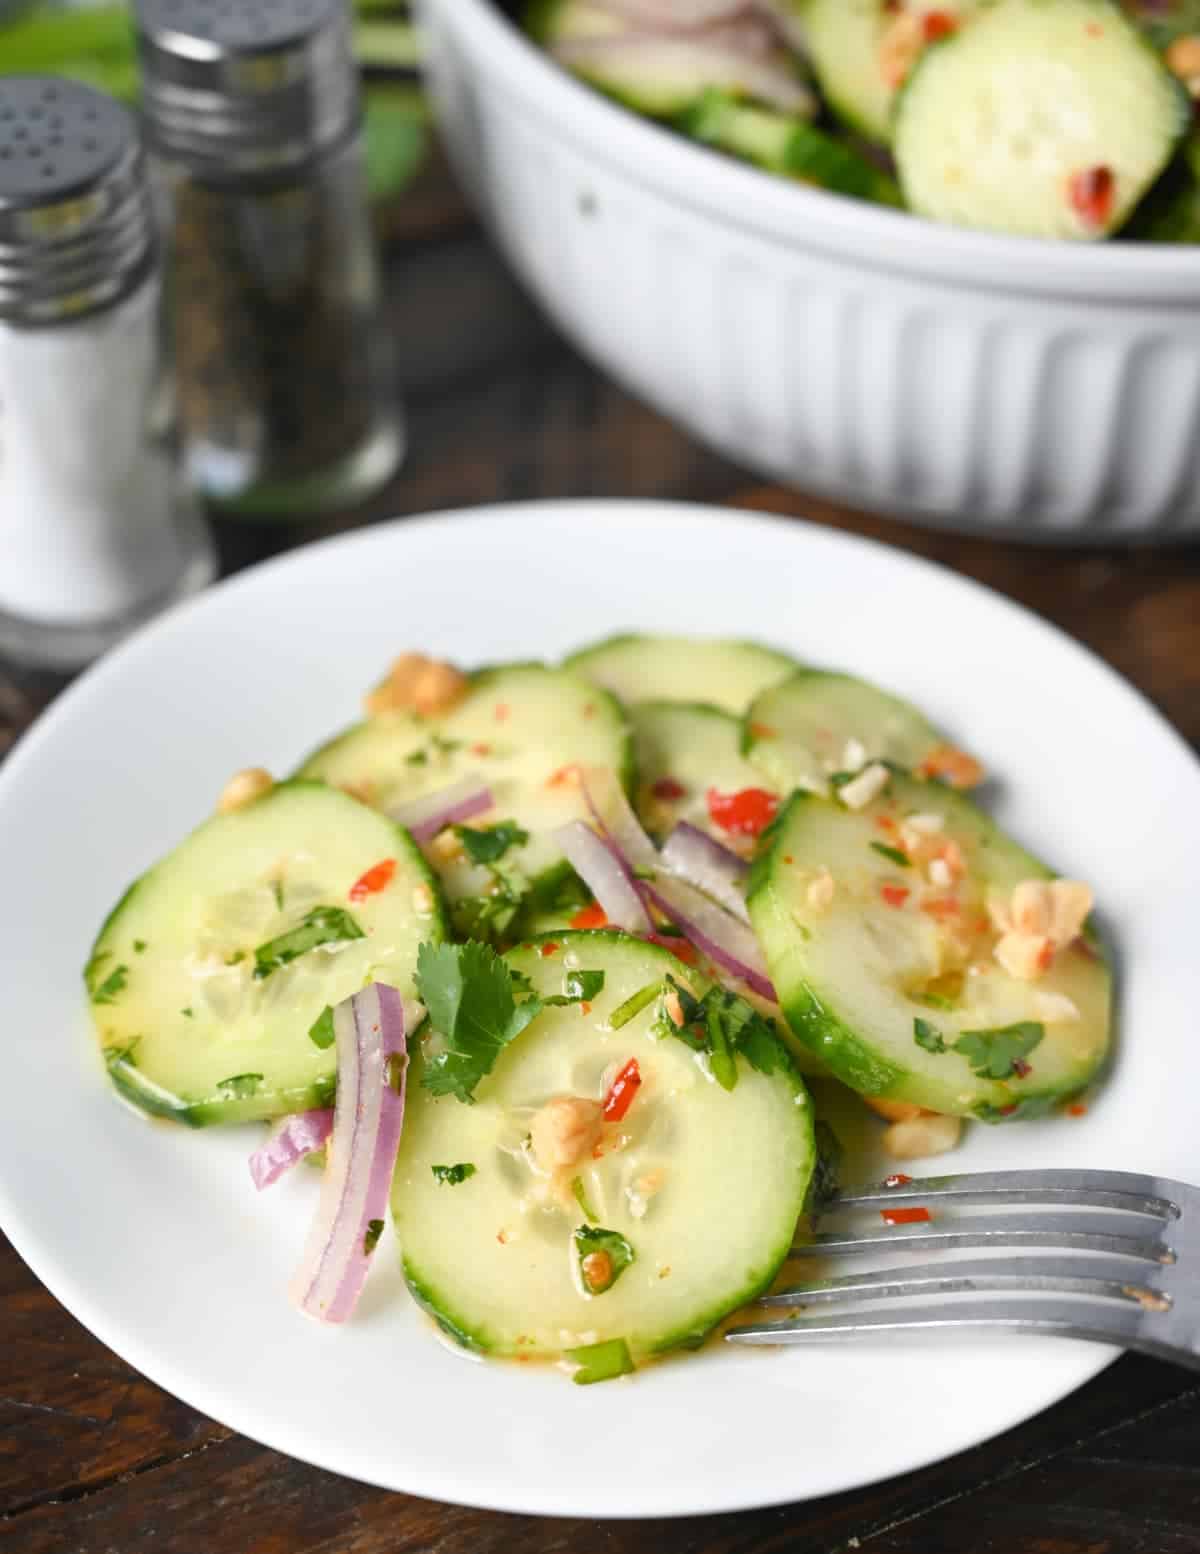 Thai cucumber salad placed on a plate with a fork.